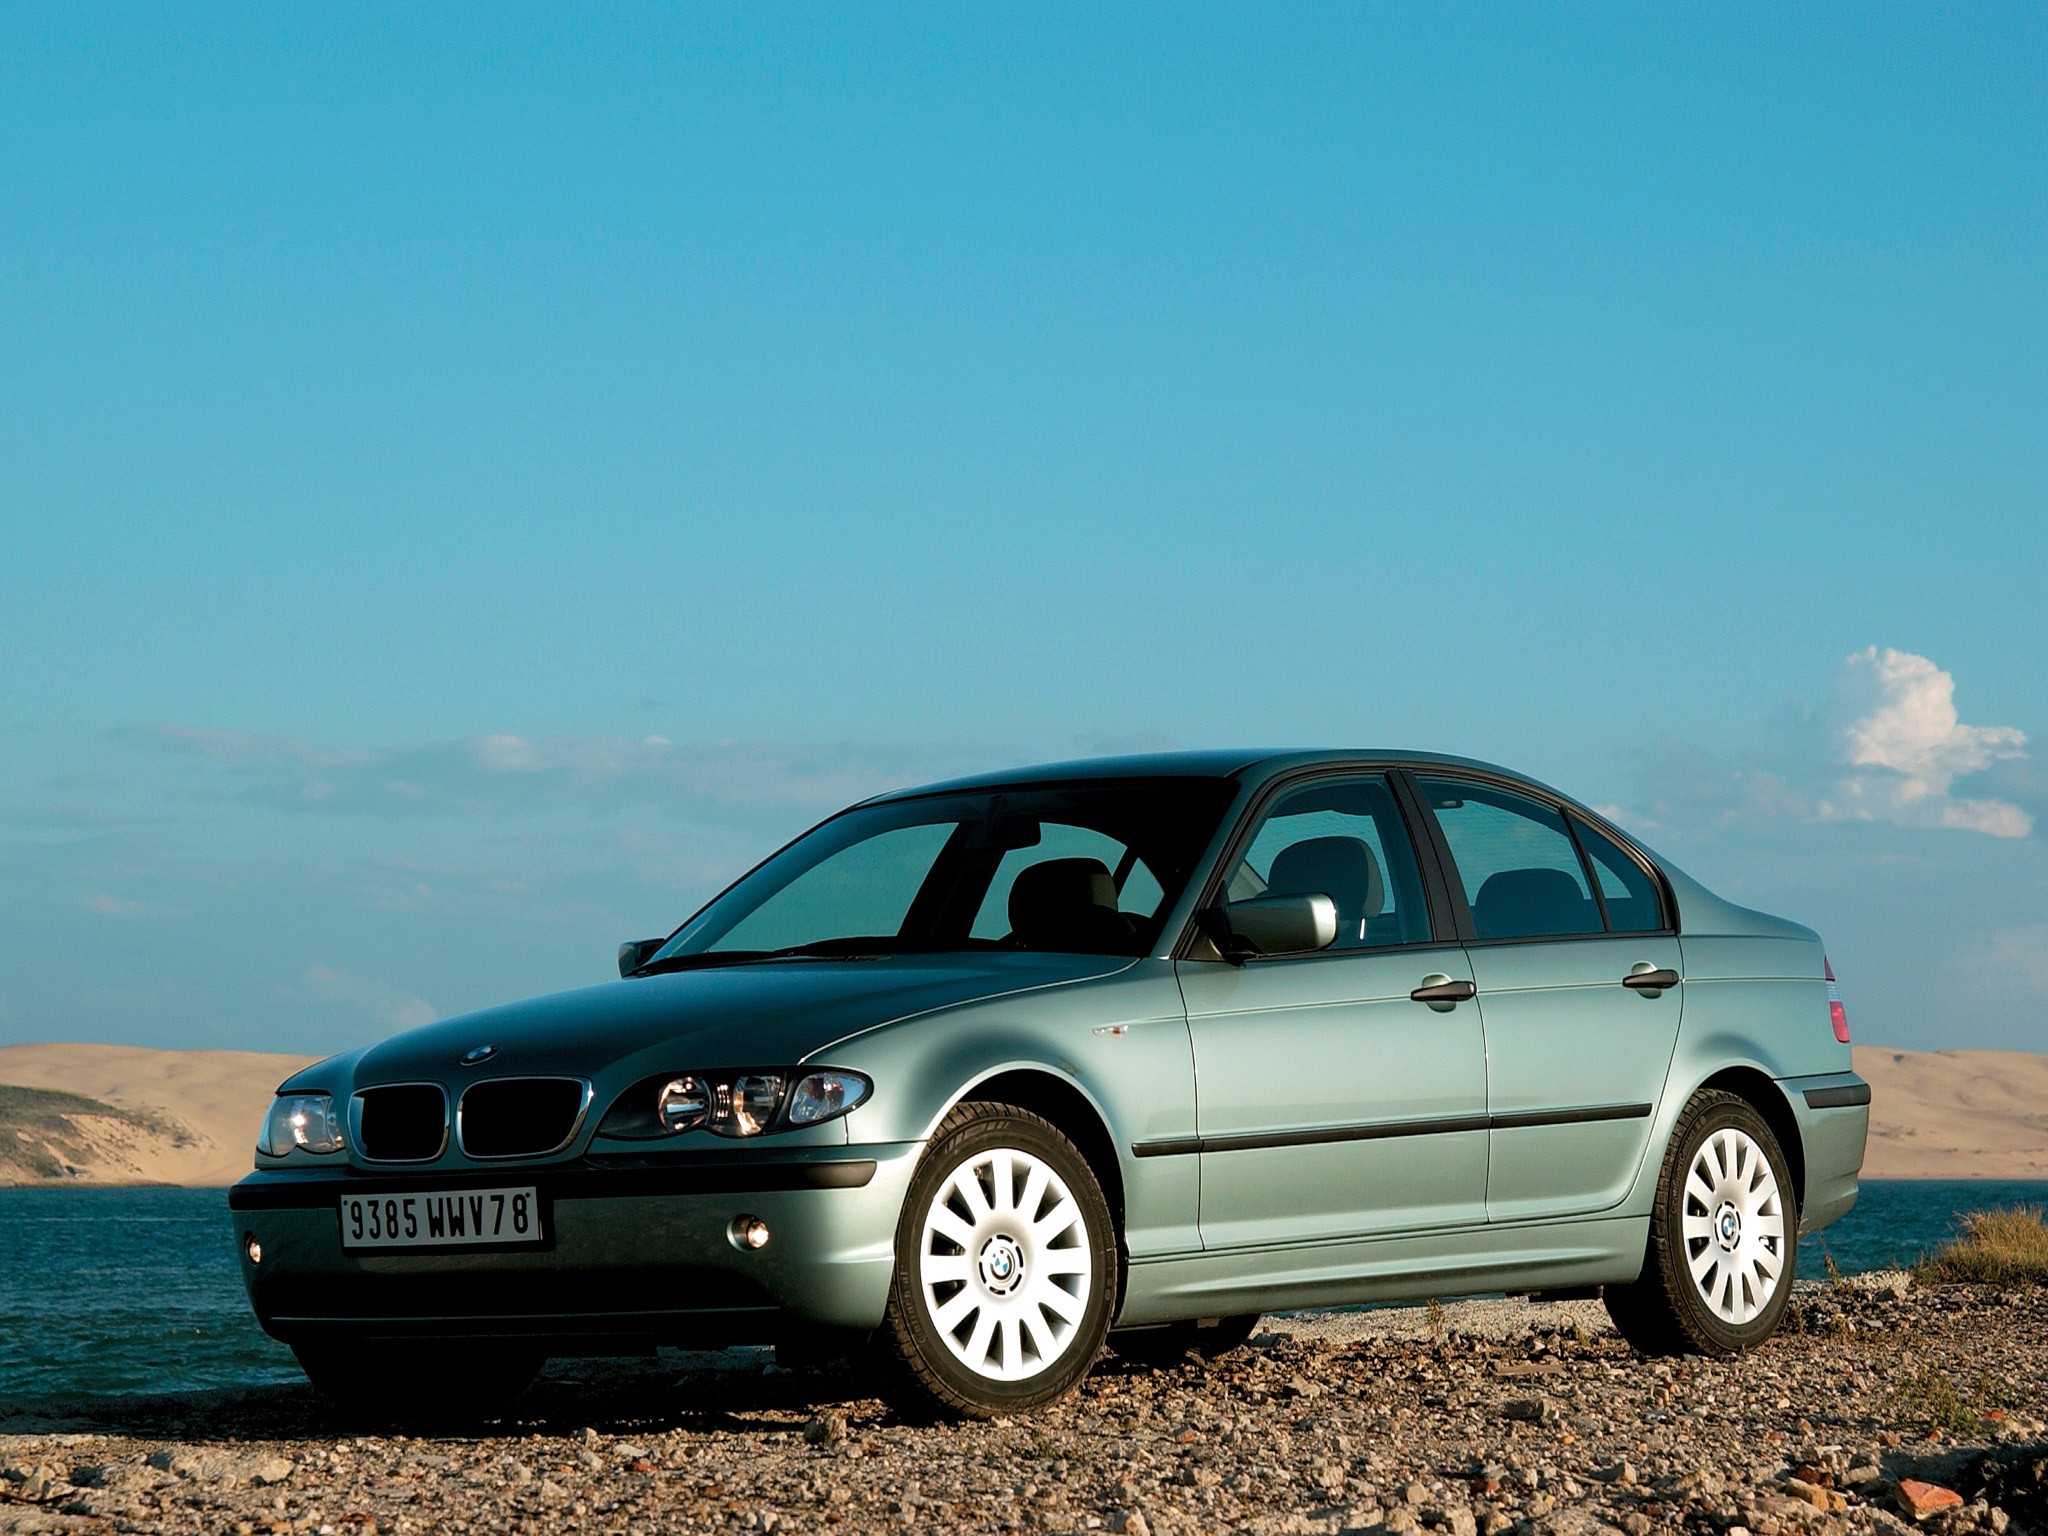 BMW 320d 2001 Review, Amazing Pictures and Images Look